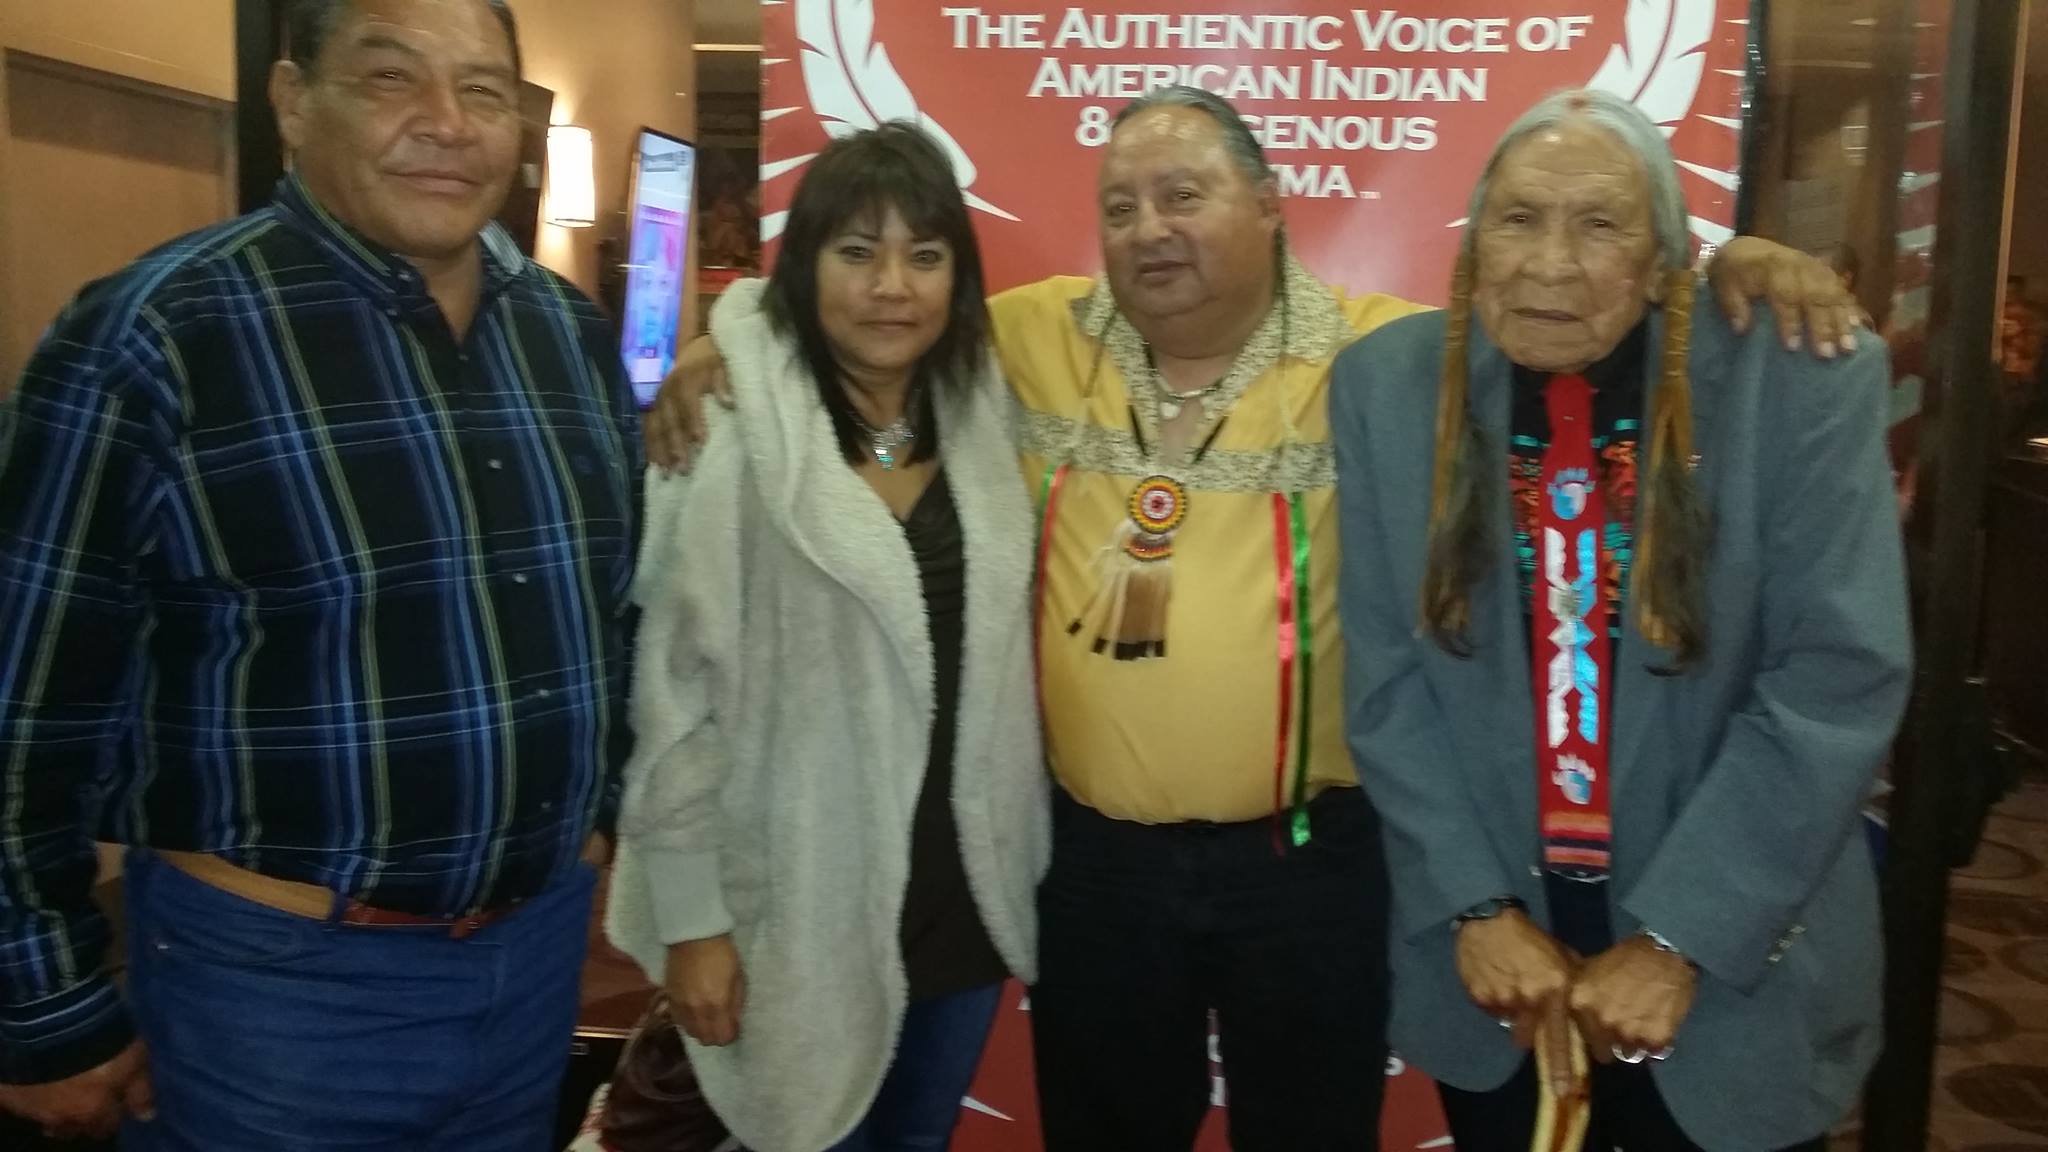 With Saginaw Grant, Steve Reevis, and Larry Ground at the 11th Red Nation Film Festival, 2014. The Authentic Voice of American Indian & Indigenous Cinema, Beverly Hills, CA 90211.